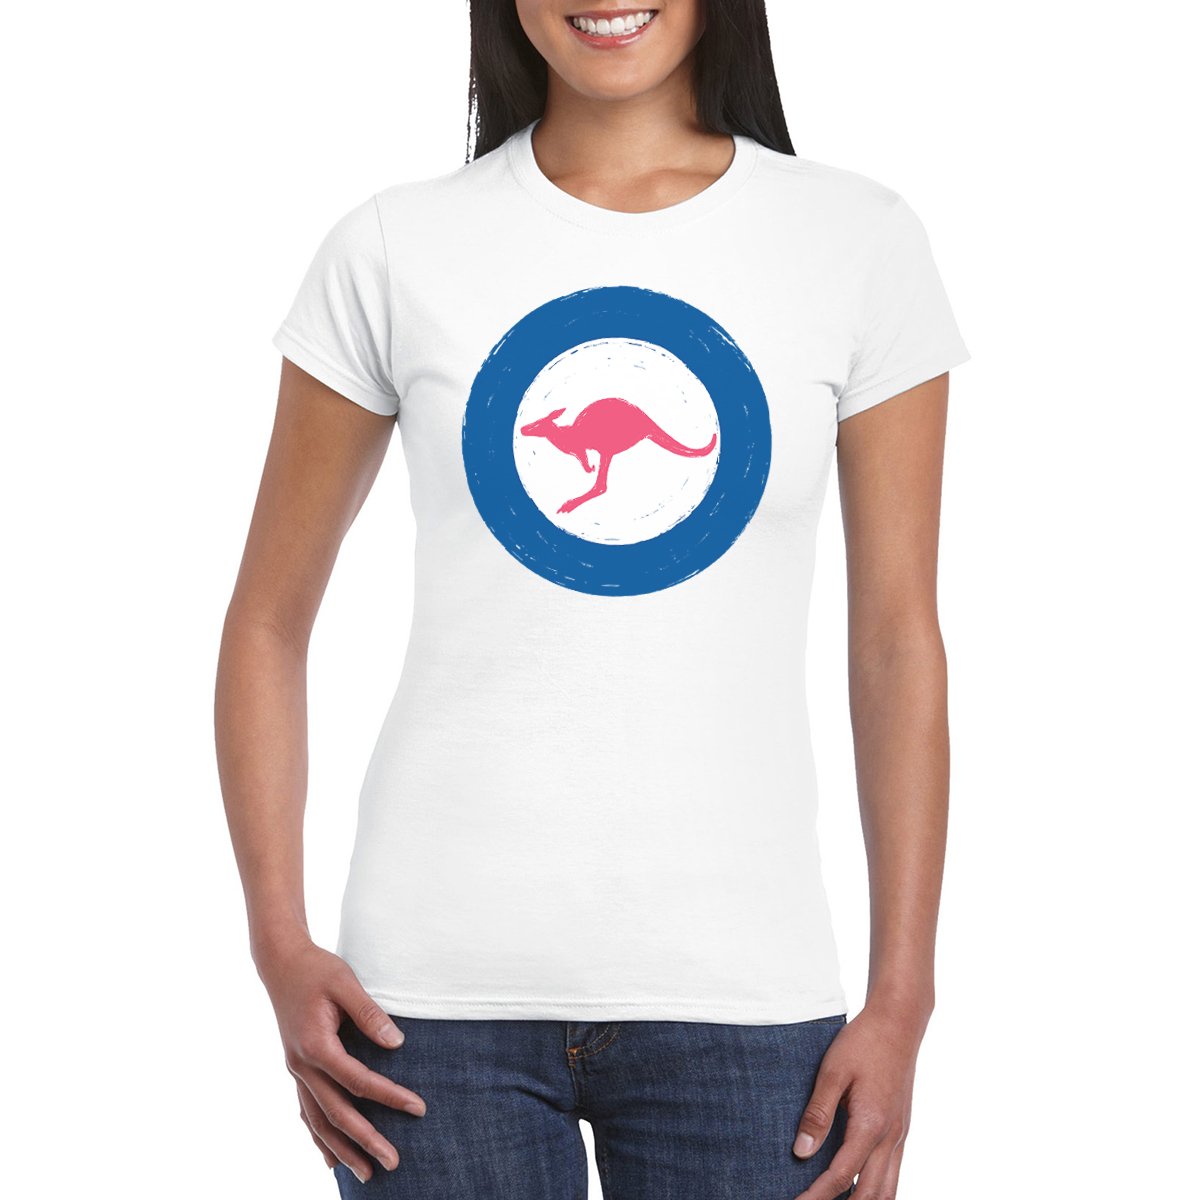 ROUNDEL Woman's Semi-Fitted T-Shirt